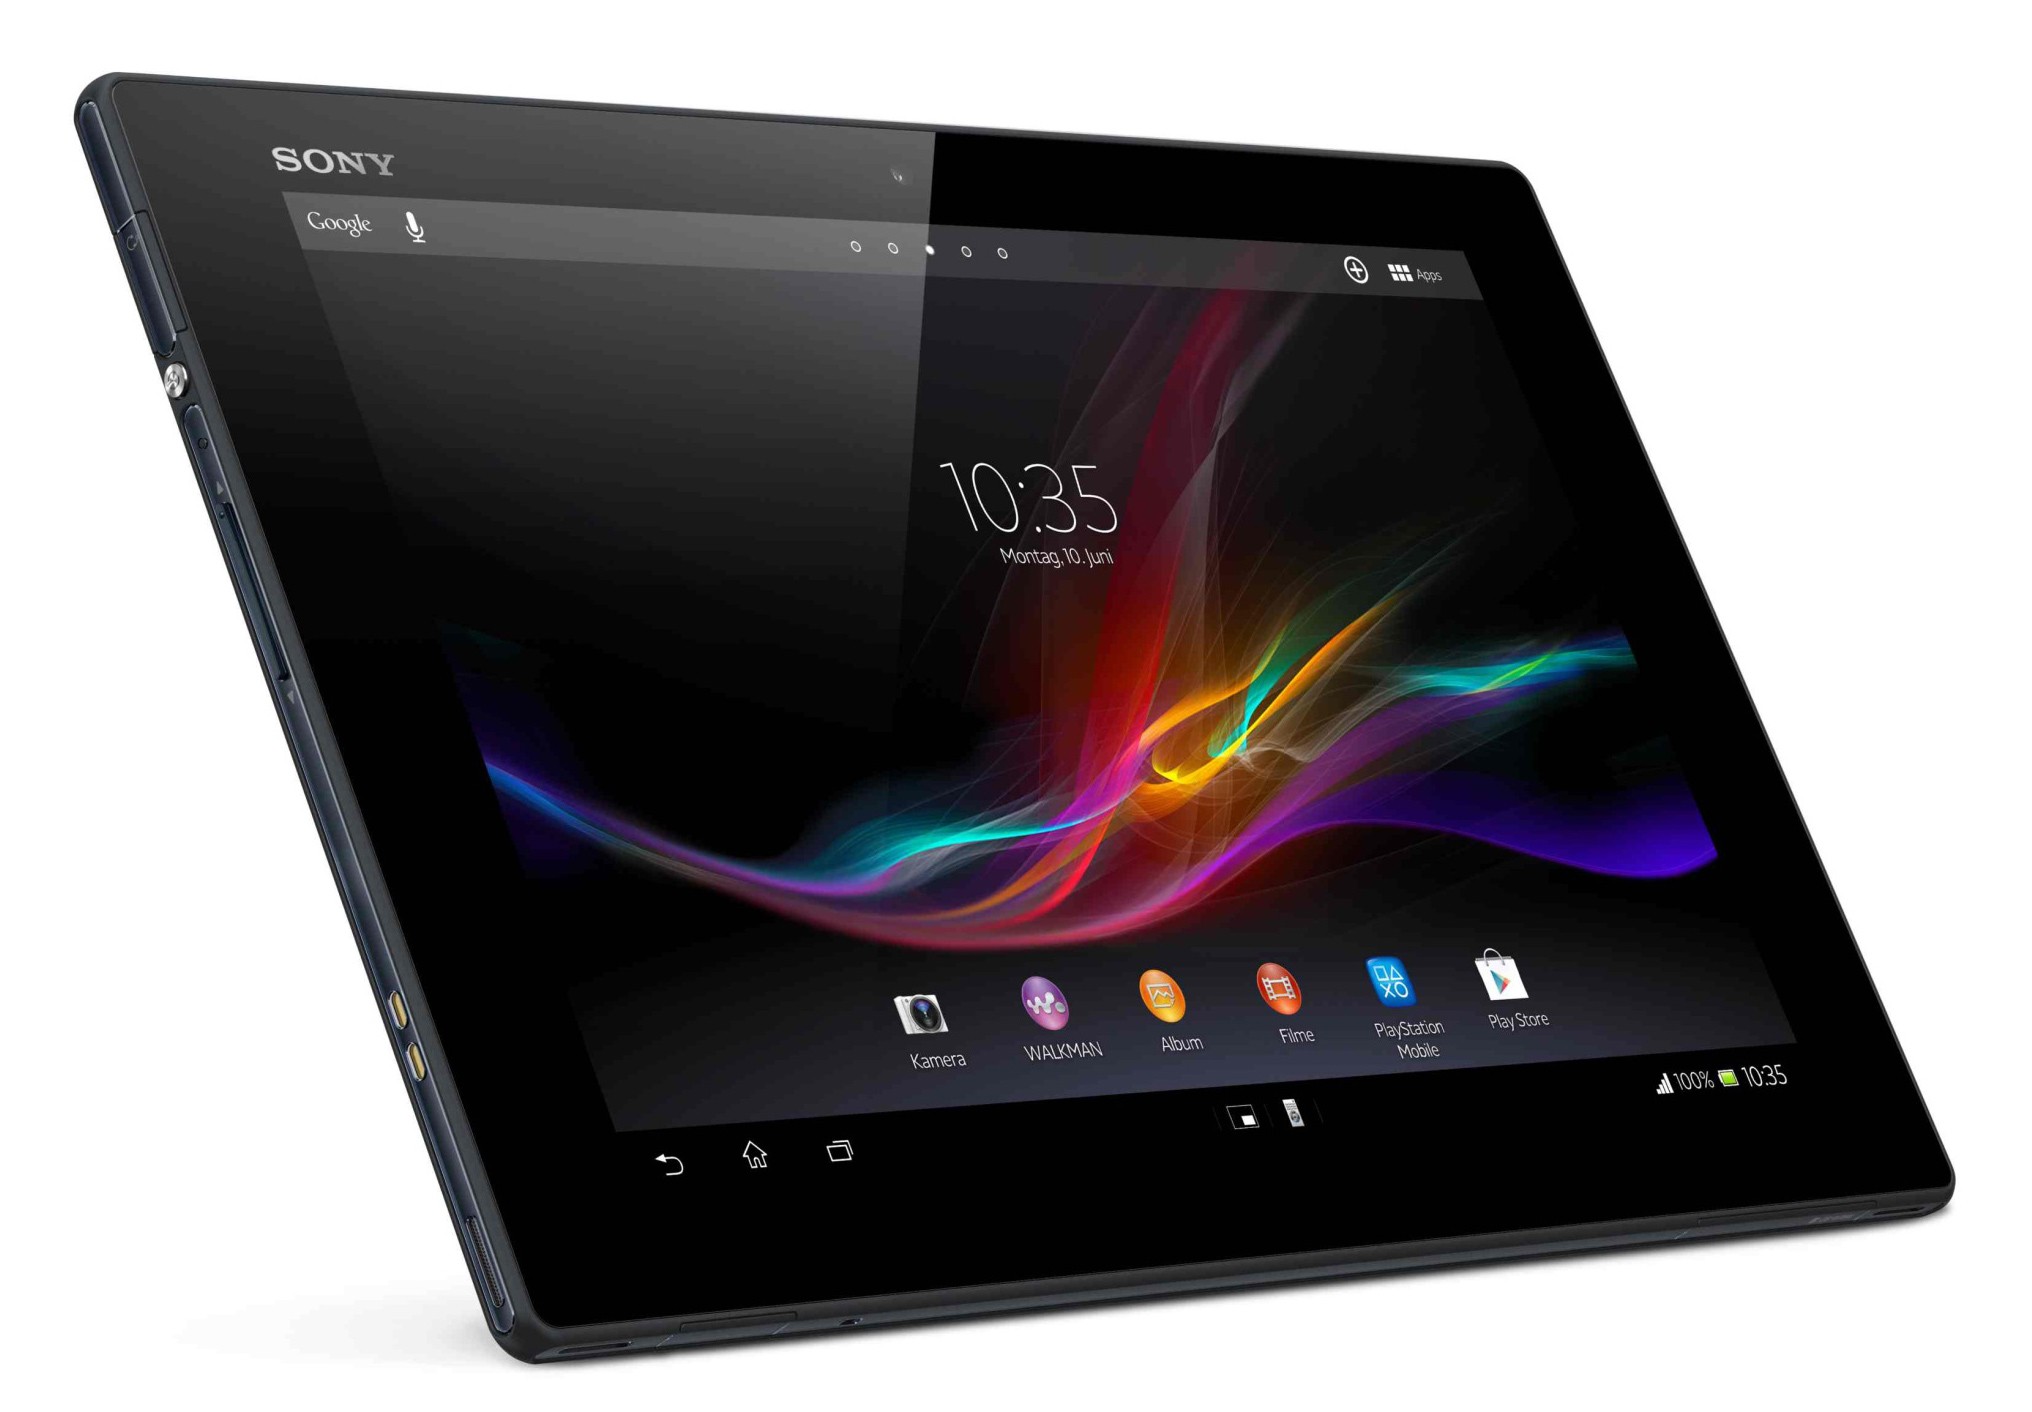 Sony Xperia Z4 Tablet launched at MWC 2015 - Hexamob